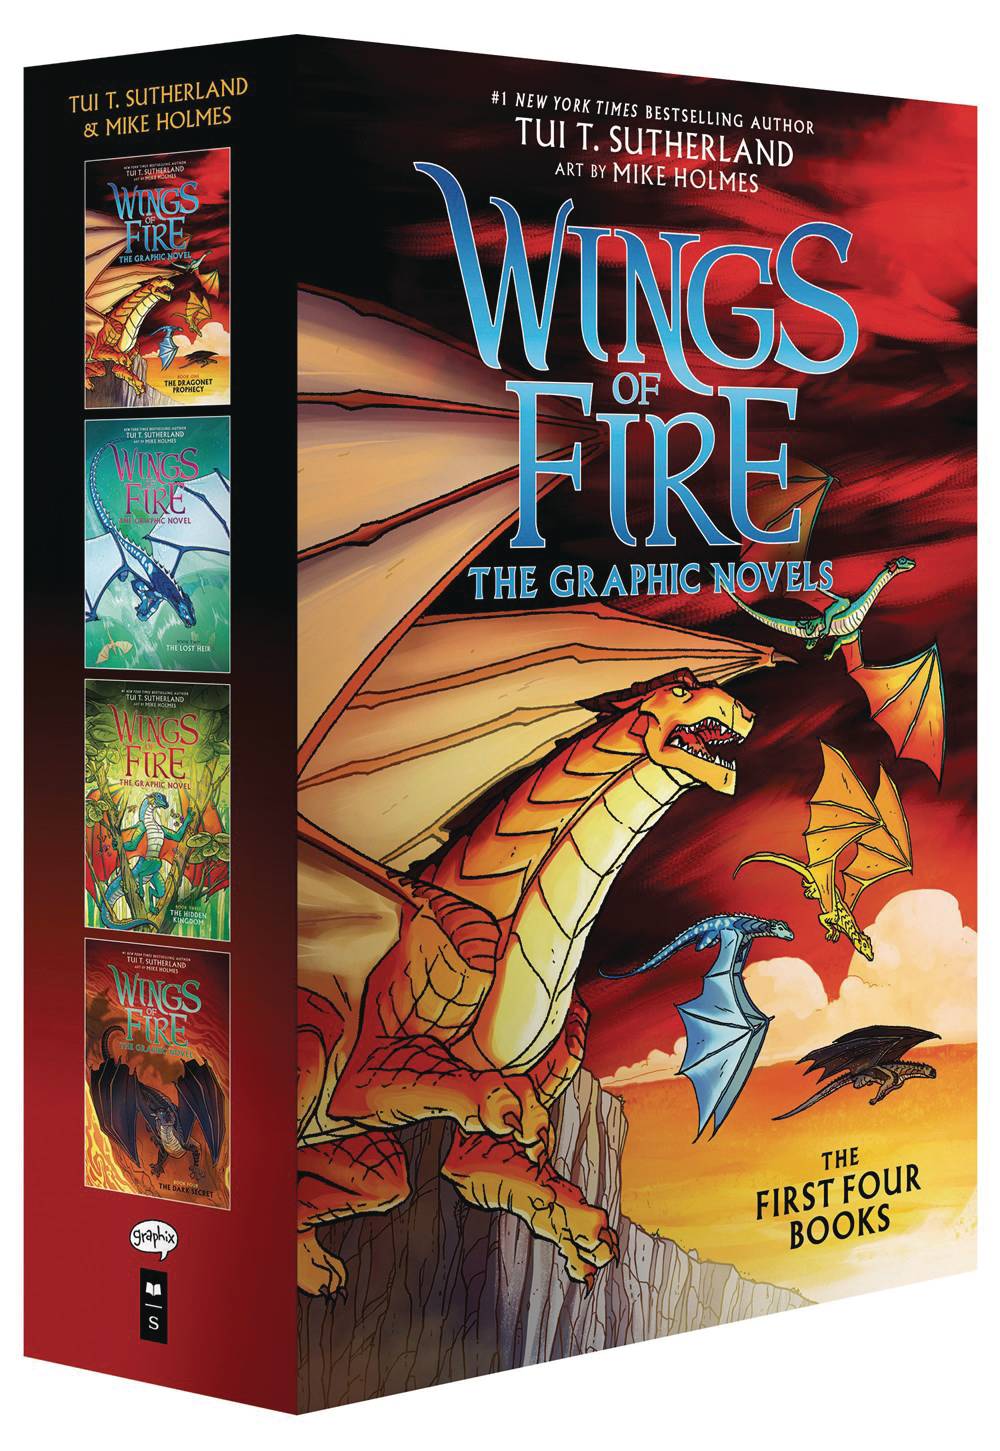 WINGS OF FIRE GN BOX SET #1 VOL 1-4